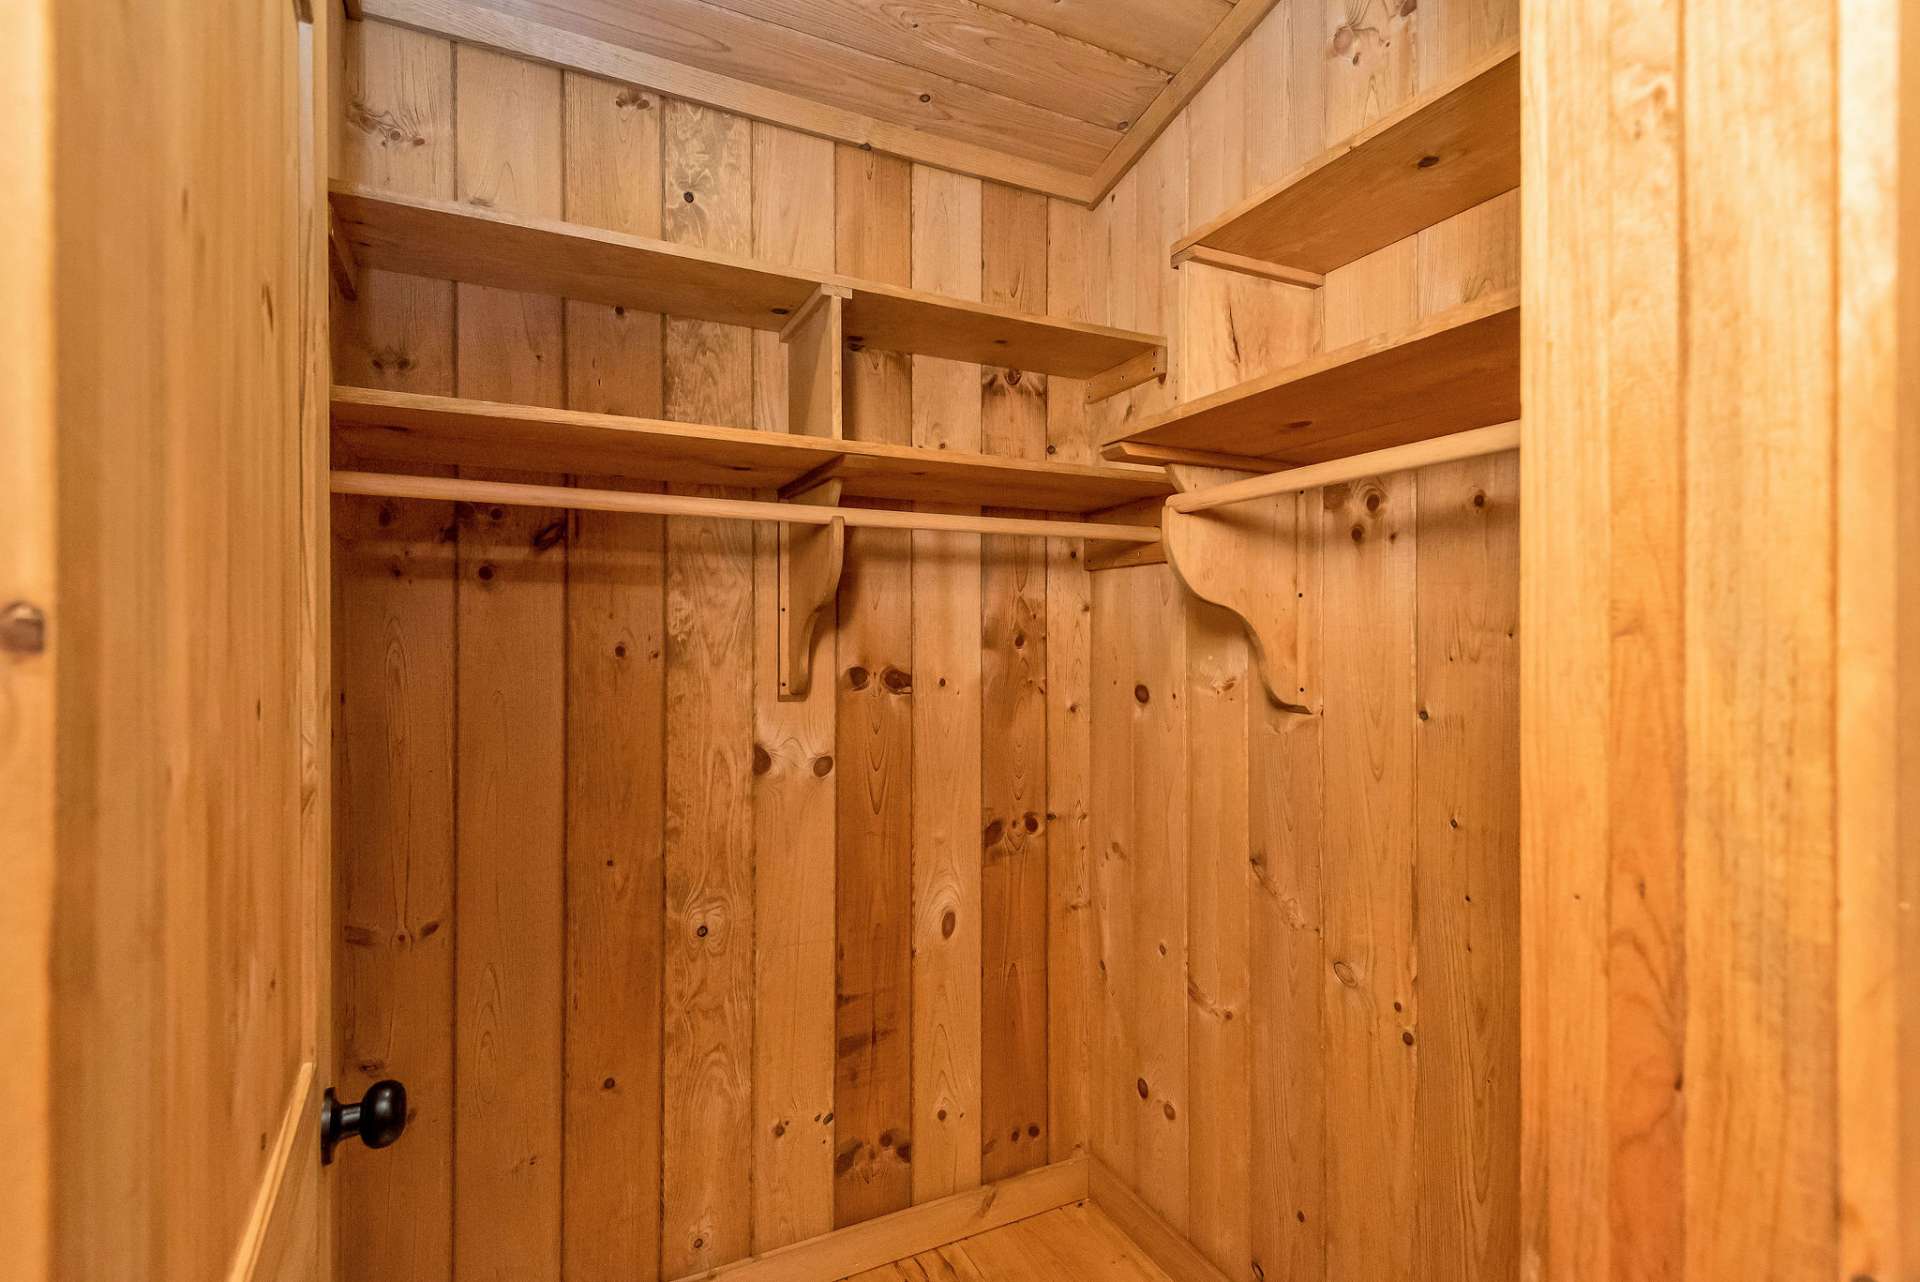 A walk-in closet provides ample storage space, ensuring organization and convenience.